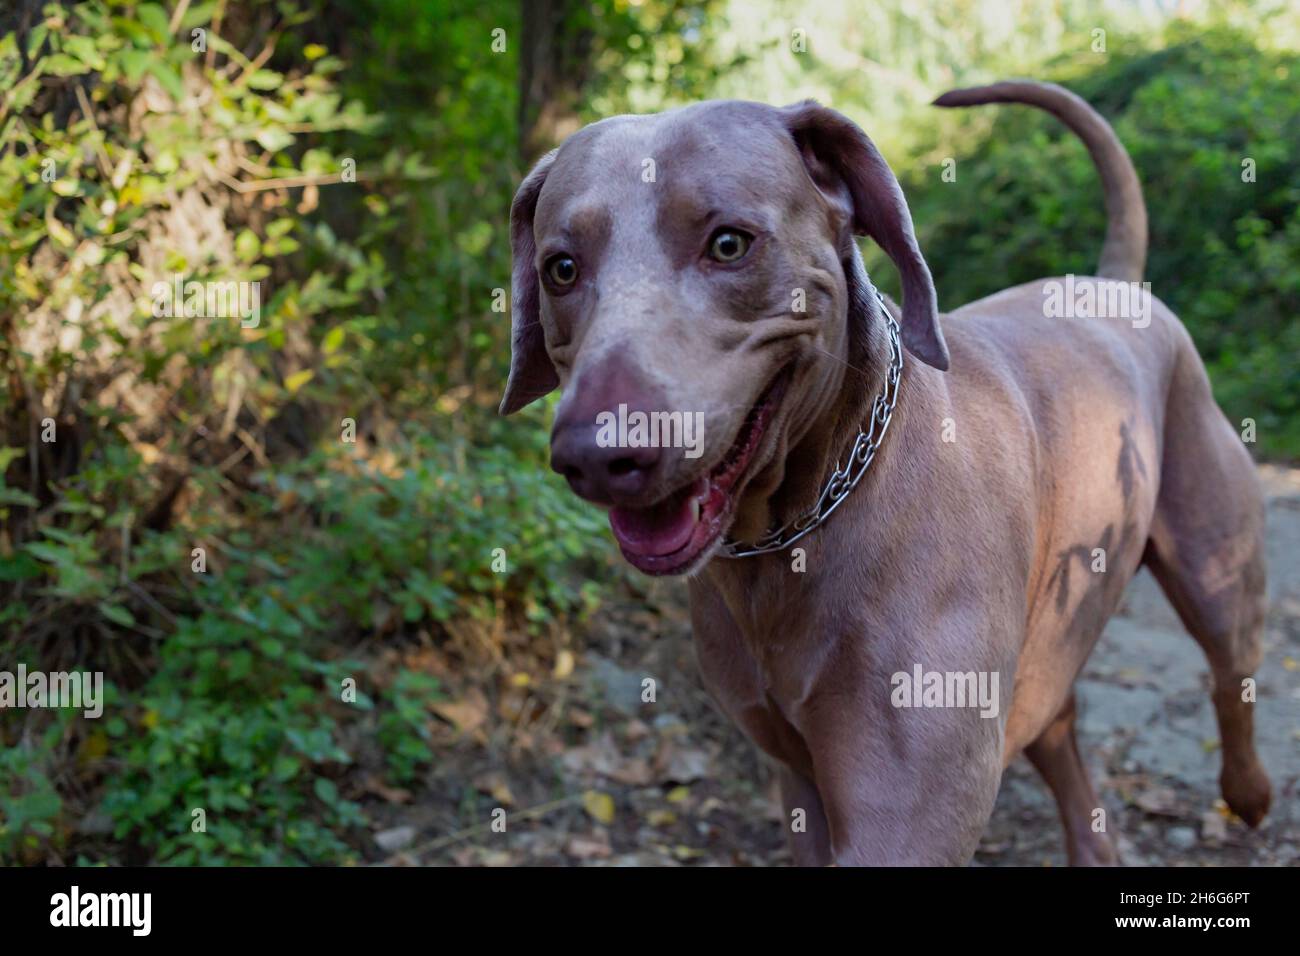 Weimaraner running down a path surrounded by forest. Close up view of the head of a hunting dog, Happy dog on a sunny day. Stock Photo